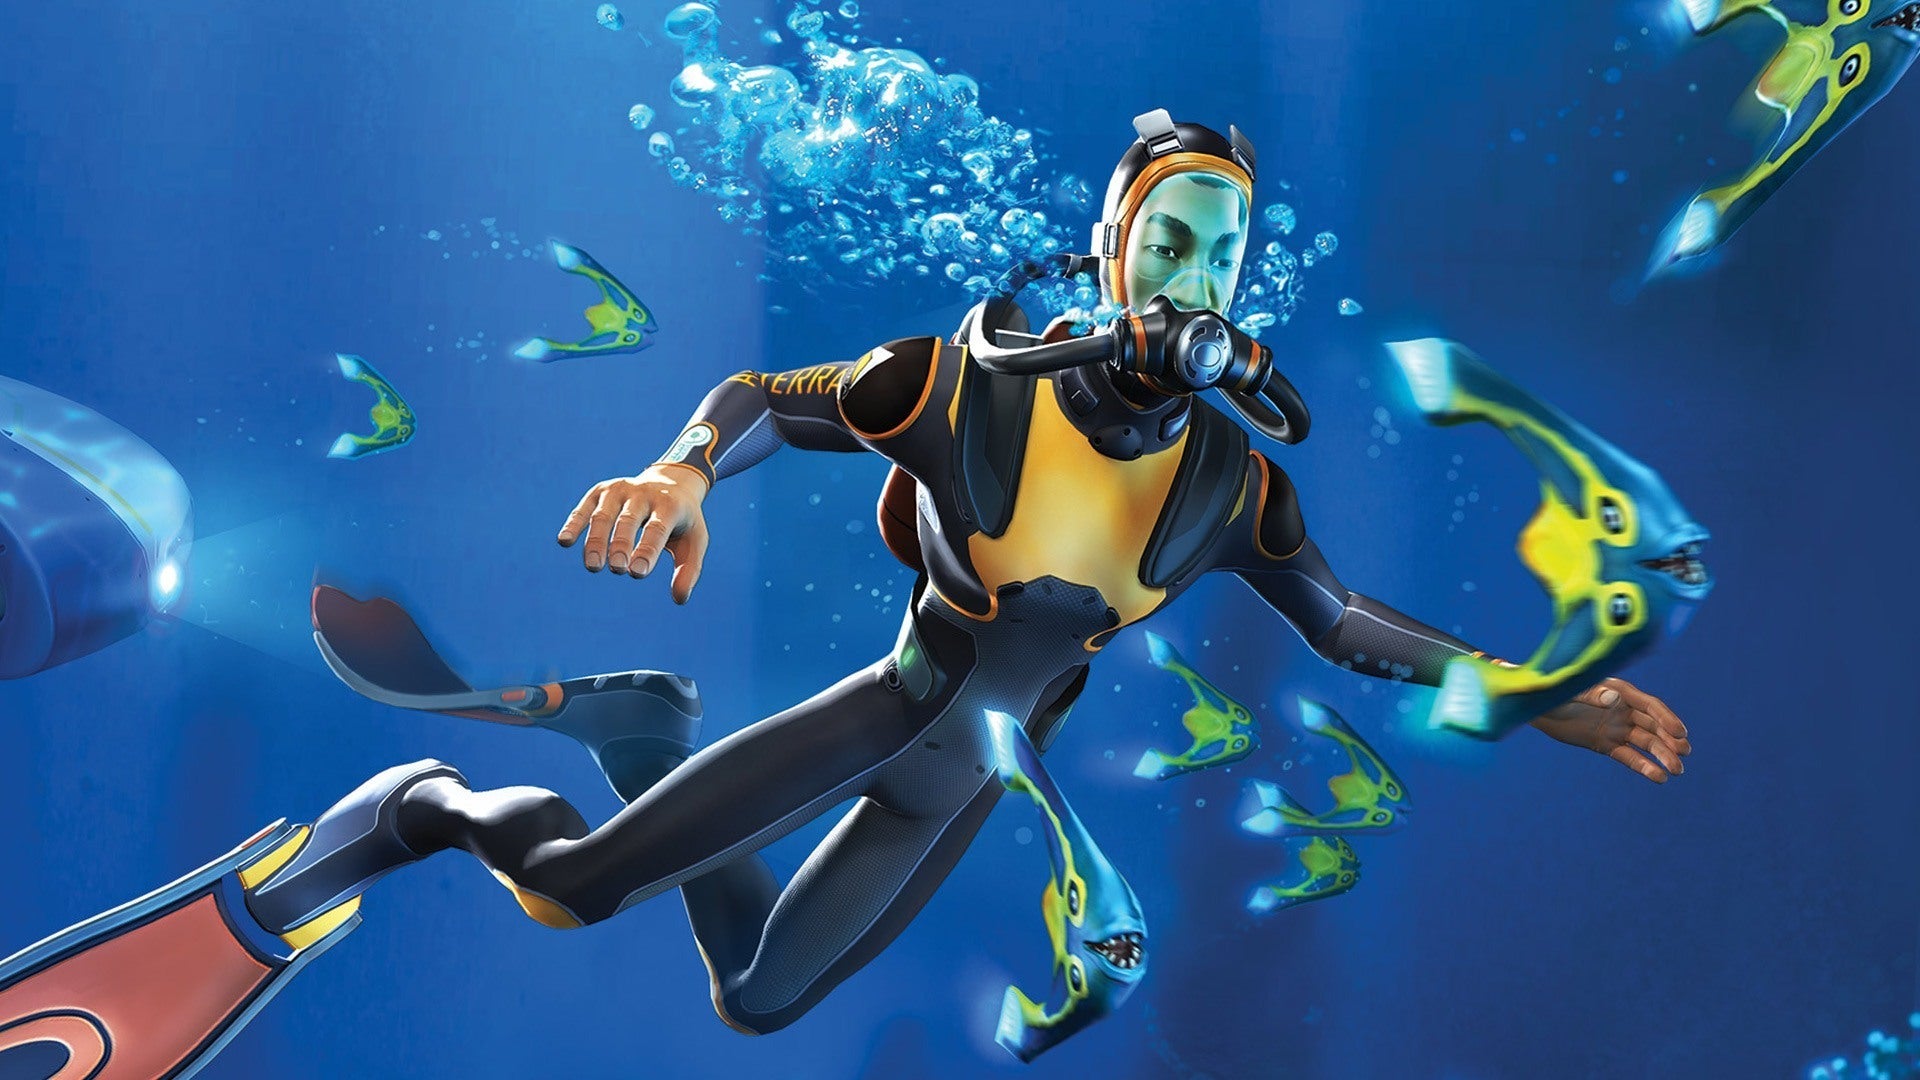 <h3>Subnautica: Below Zero</h3><br /> <b>Review score: 9</b><br /><br /> From our review: Subnautica: Below Zero is another big, frosty bite of one of the best open world survival games to come along since the genre's inception. It might not be as massive as the original, but there is so much style and substance packed into each trench, cave, and bloodthirsty shark-squid-thing that it's hard to complain. New vehicles, new gadgets, and across-the-board tune ups to technical performance and quality of life round out the experience skillfully. Whether you were ravenous for more Subnautica like me, or don't even know what you're in for, I don't think you'll be disappointed. – Leana Hafer